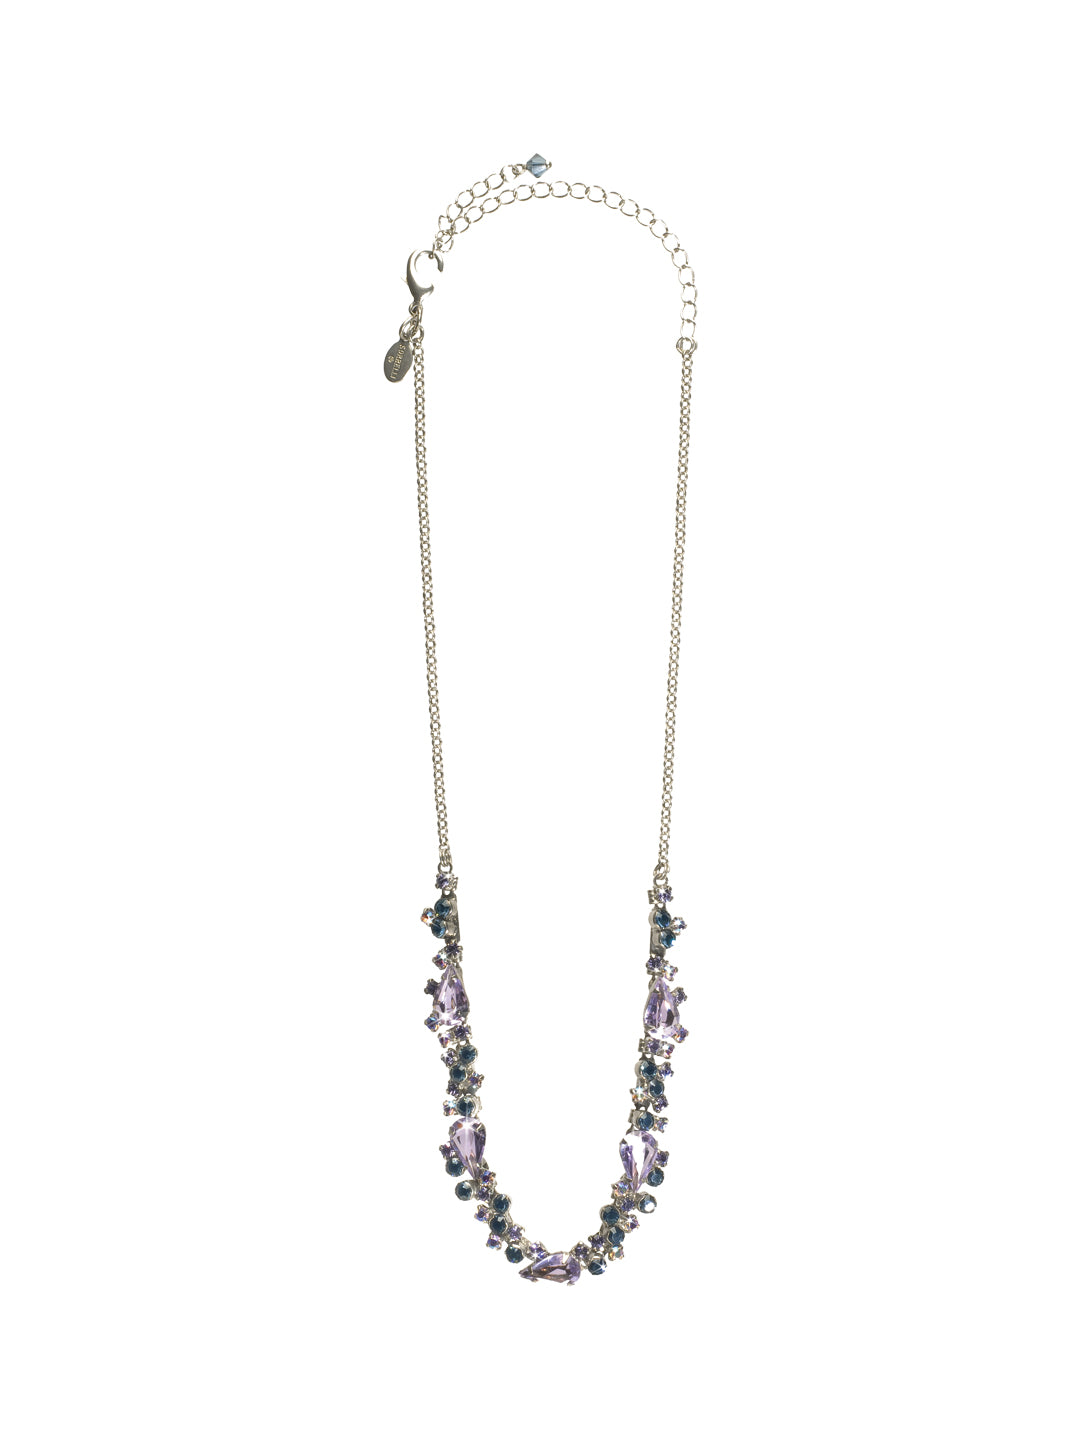 Classically Clustered Necklace - NCP7ASHY - Eye popping glitz! This classic piece layers on the baguettes, with bold teardrops tying it all together. Strung along a simple chain, your neck will be beaming! From Sorrelli's Hydrangea collection in our Antique Silver-tone finish.